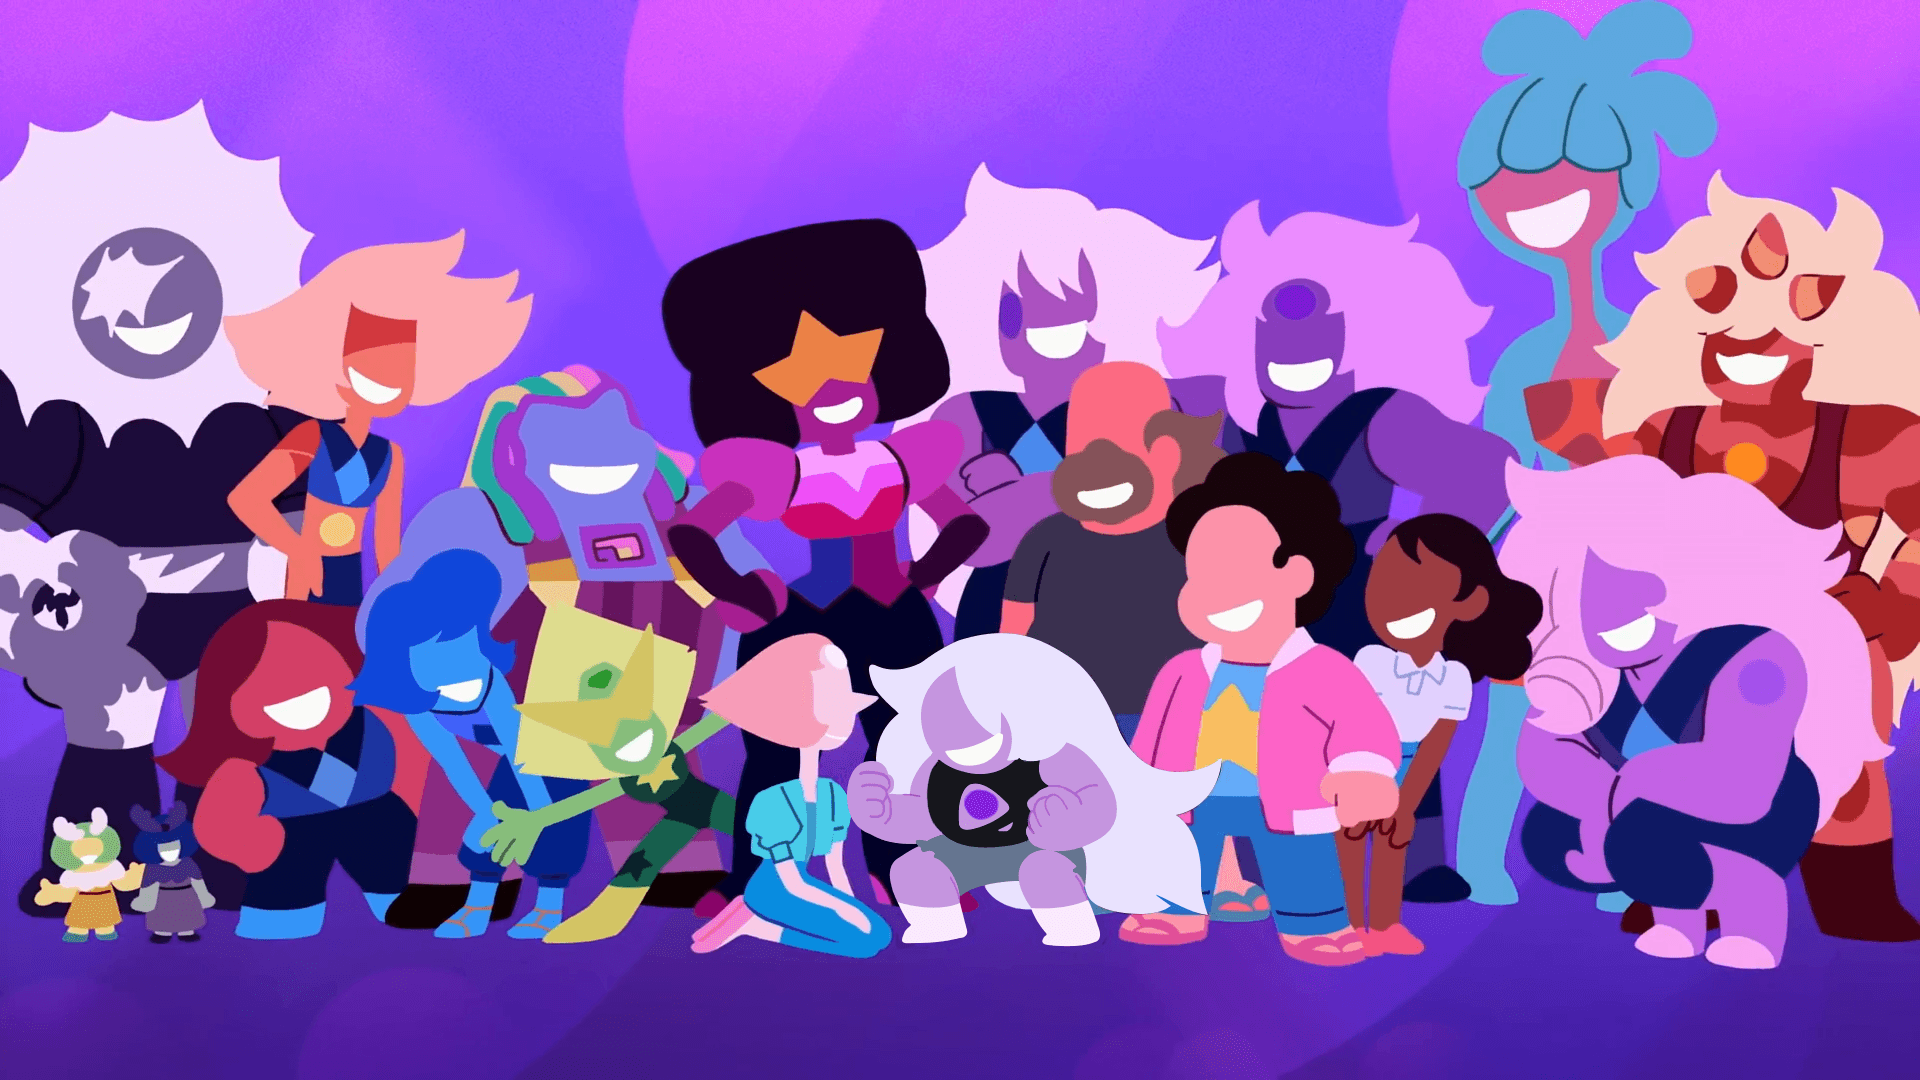 Steven Universe Anime Wallpapers Top Free Steven Universe Anime Backgrounds Wallpaperaccess 